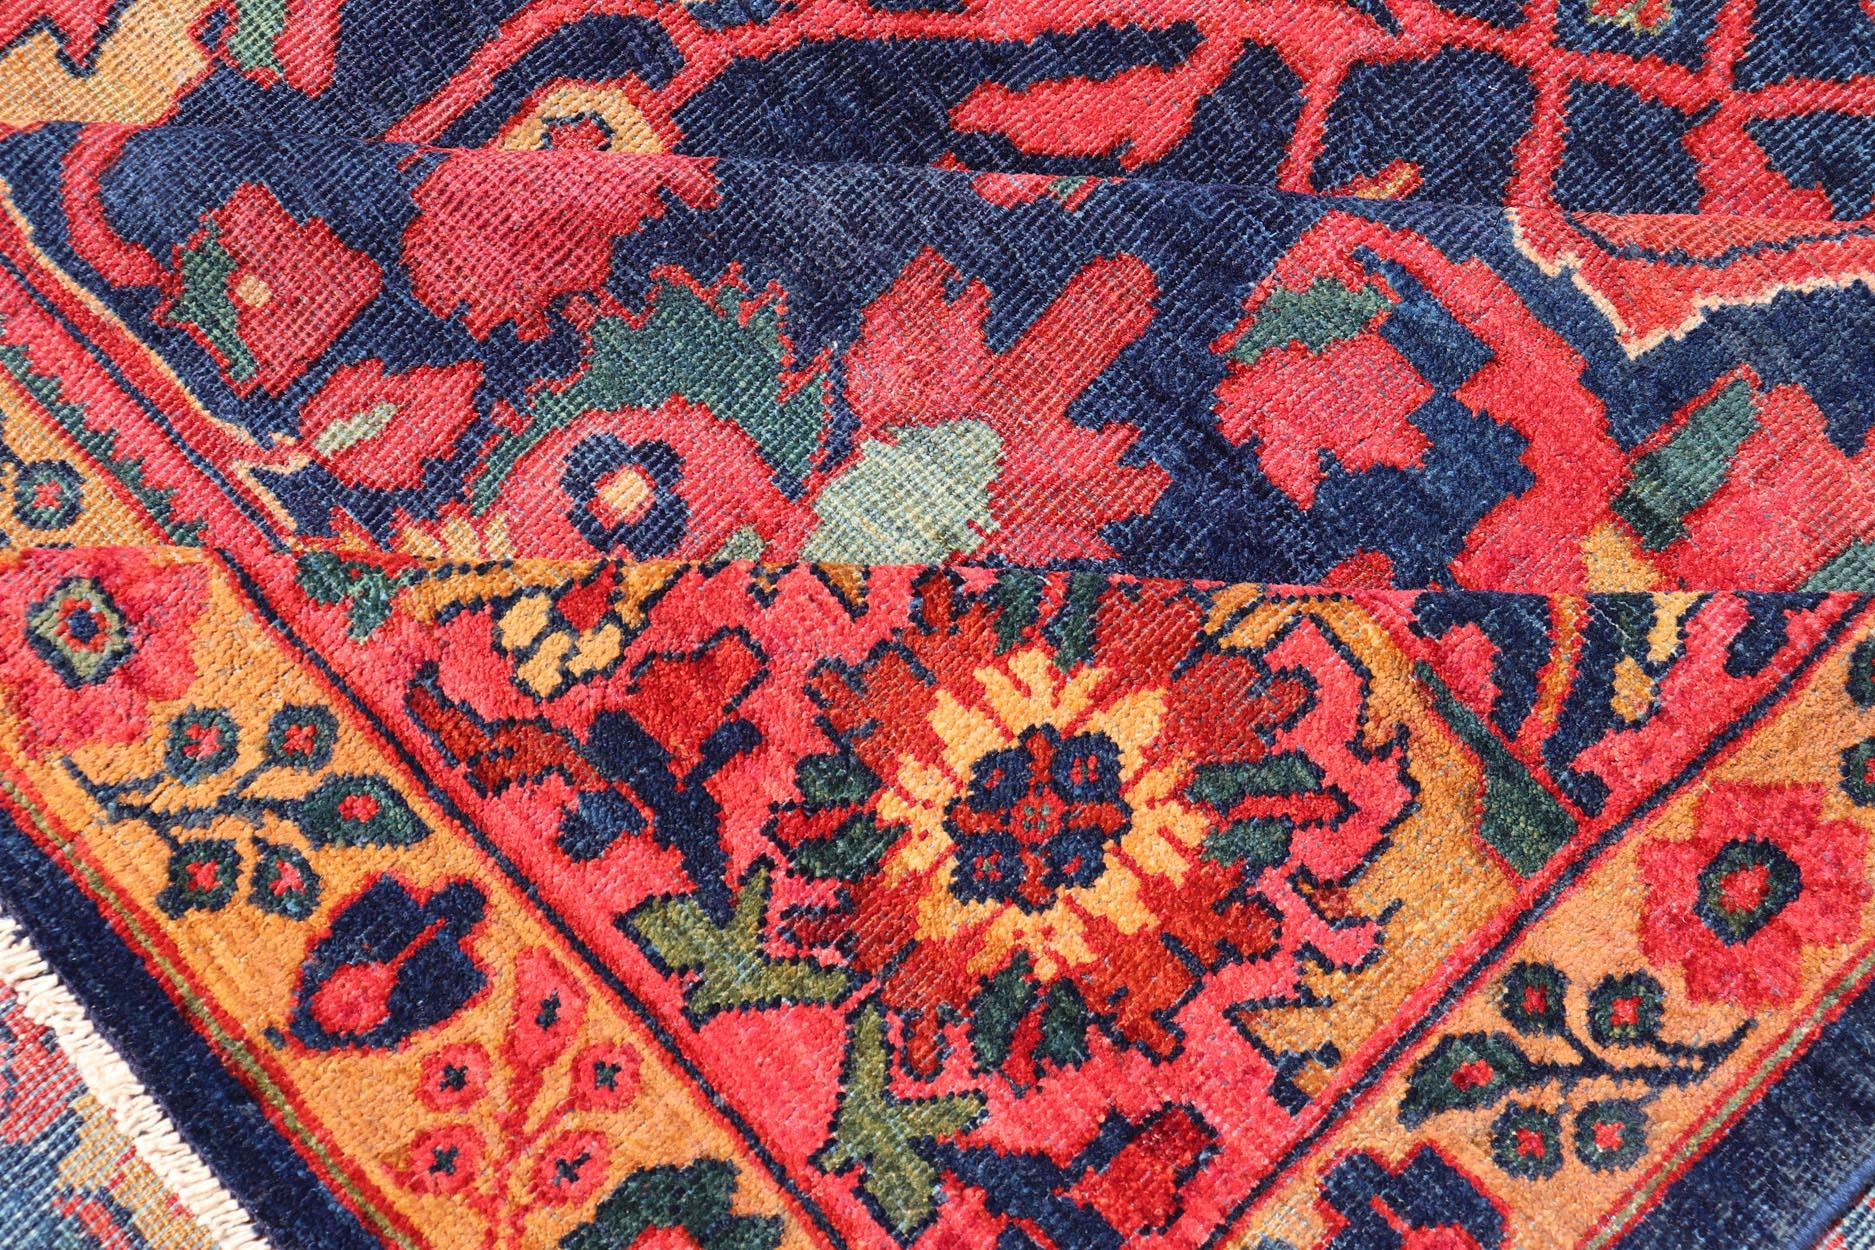 Antique Persian Sultanabad Rug With Large Scale Design in Blue, Red, and Gold  For Sale 7